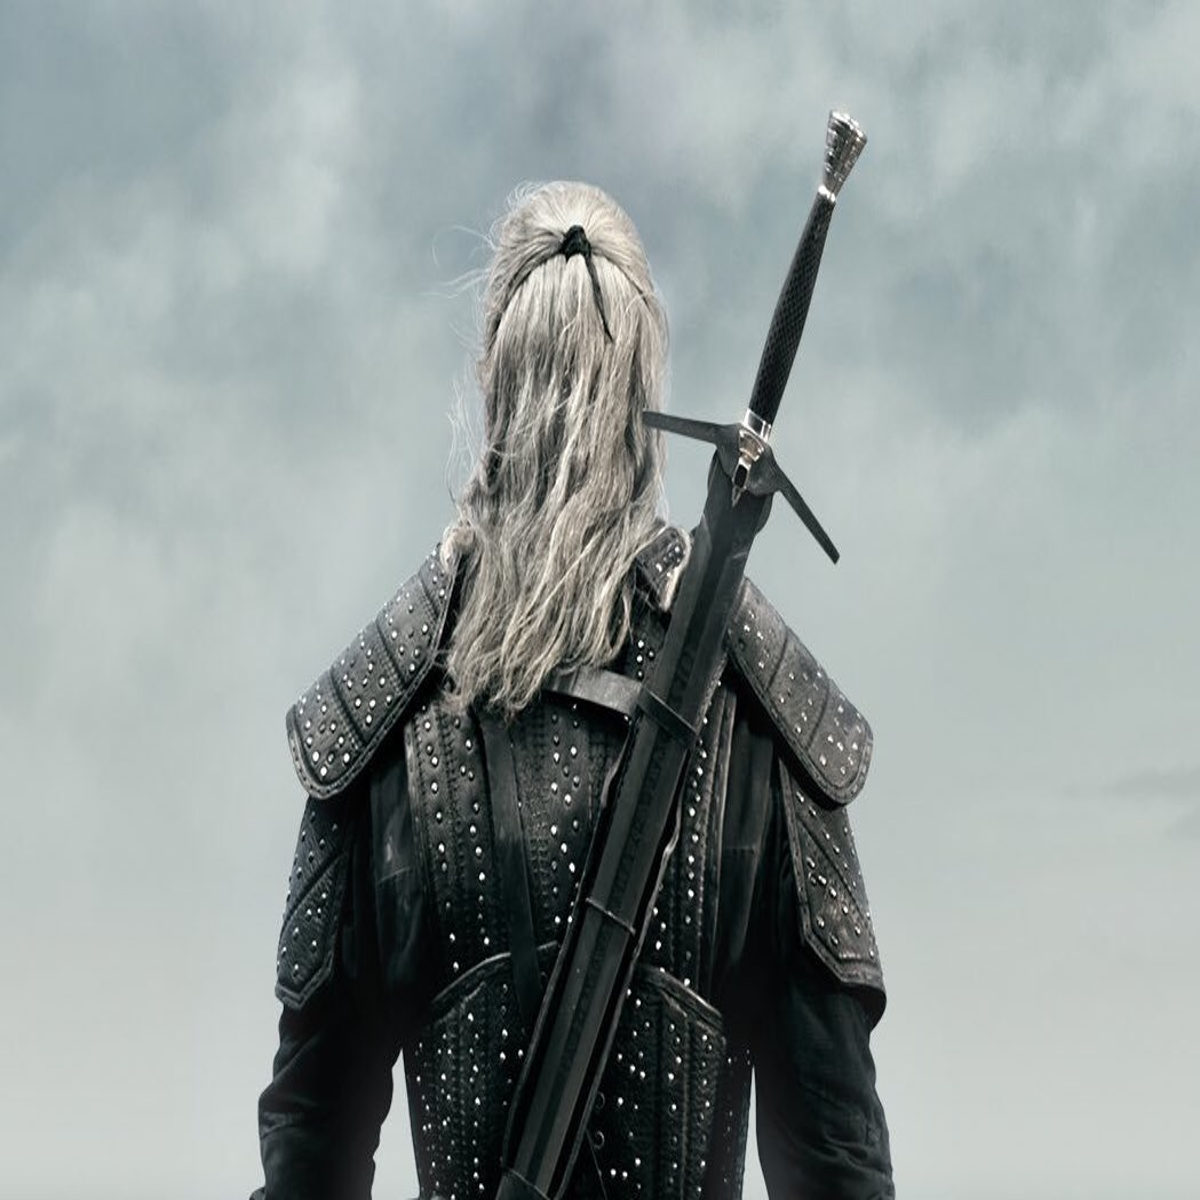 The Witcher 4 release date is a very promising sign